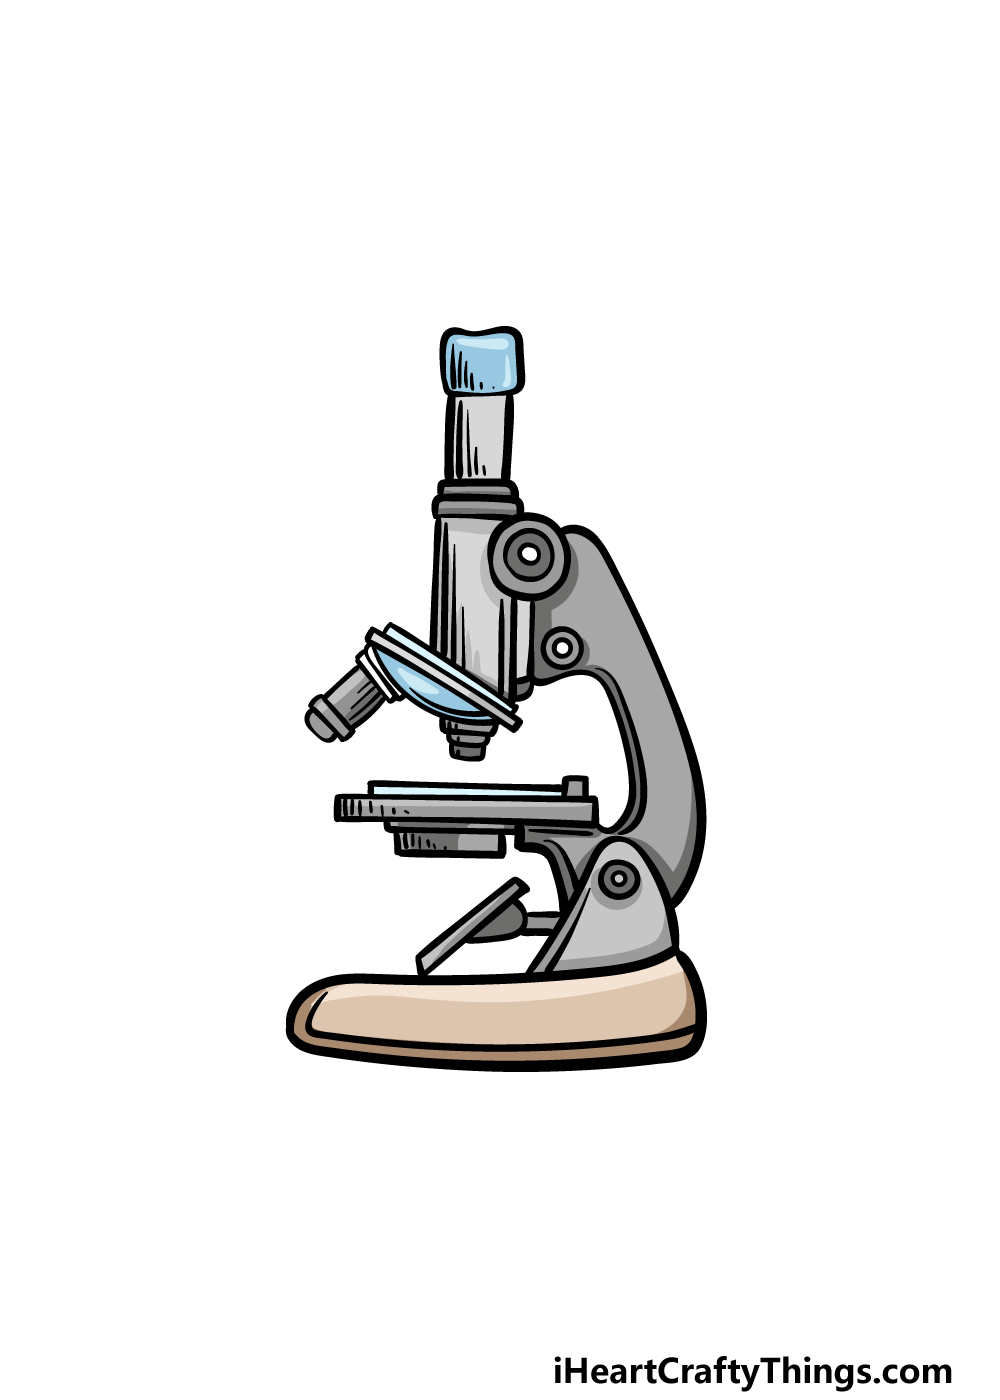 Microscope Drawing - How To Draw A Microscope Step By Step